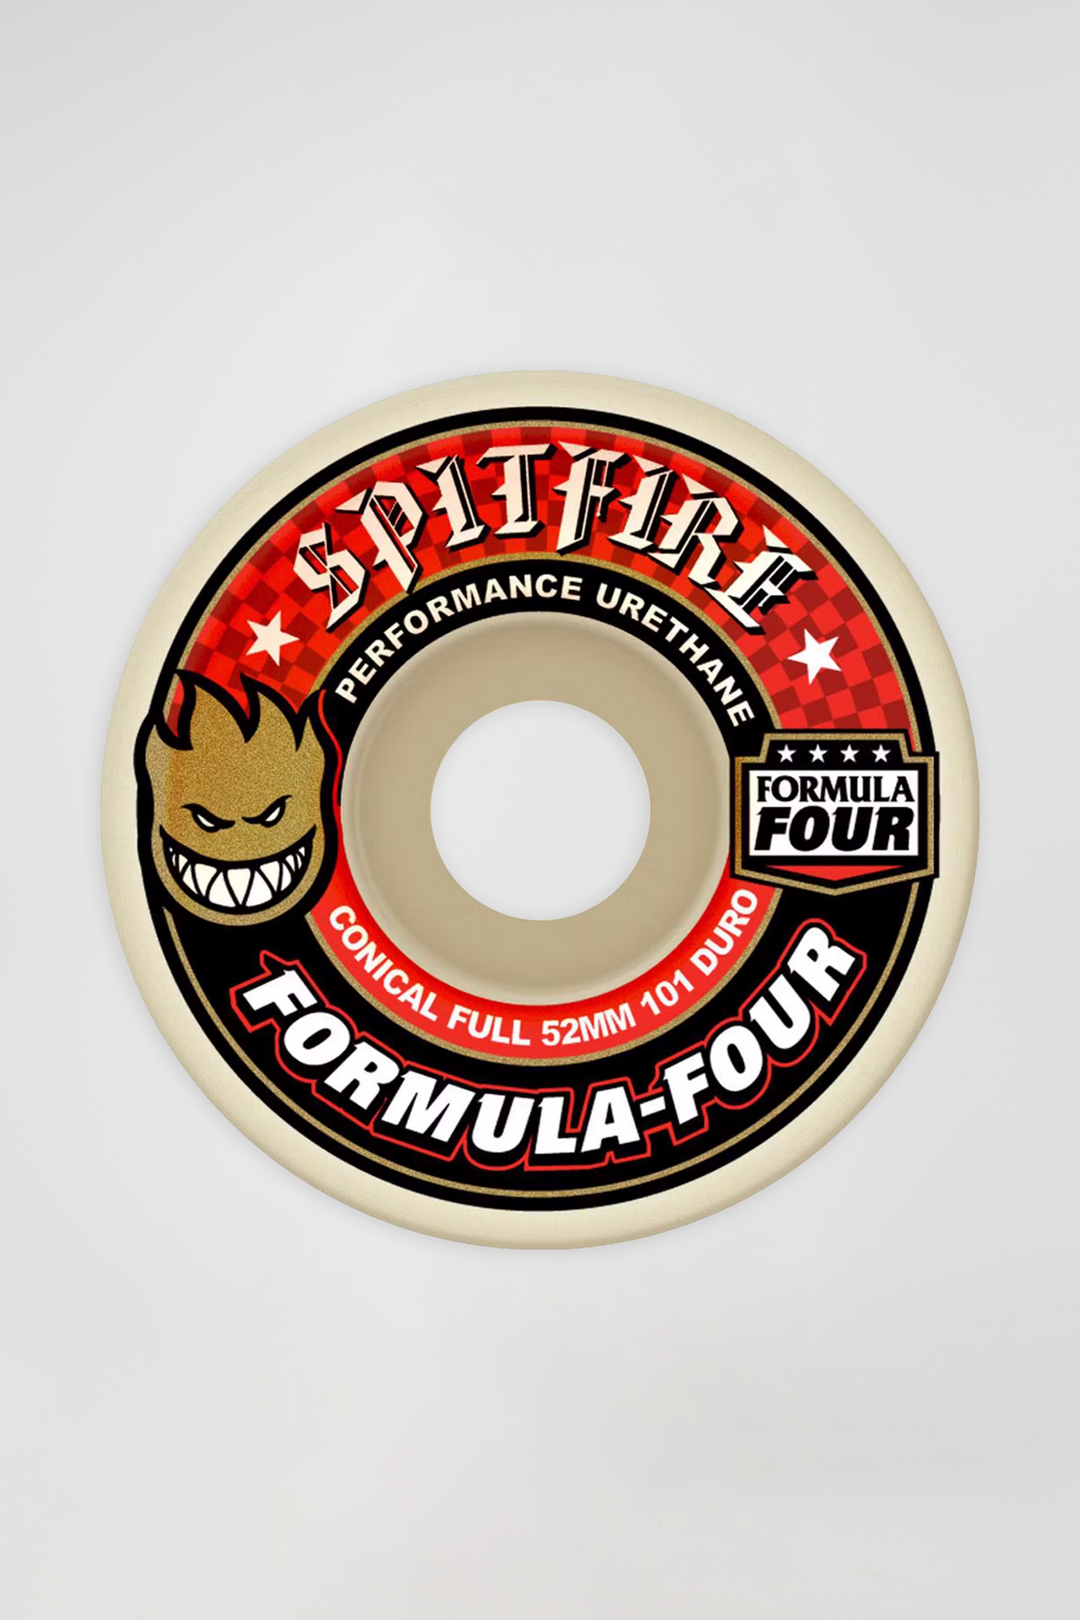 Spitfire Formula Four Conical Full 101A Wheels